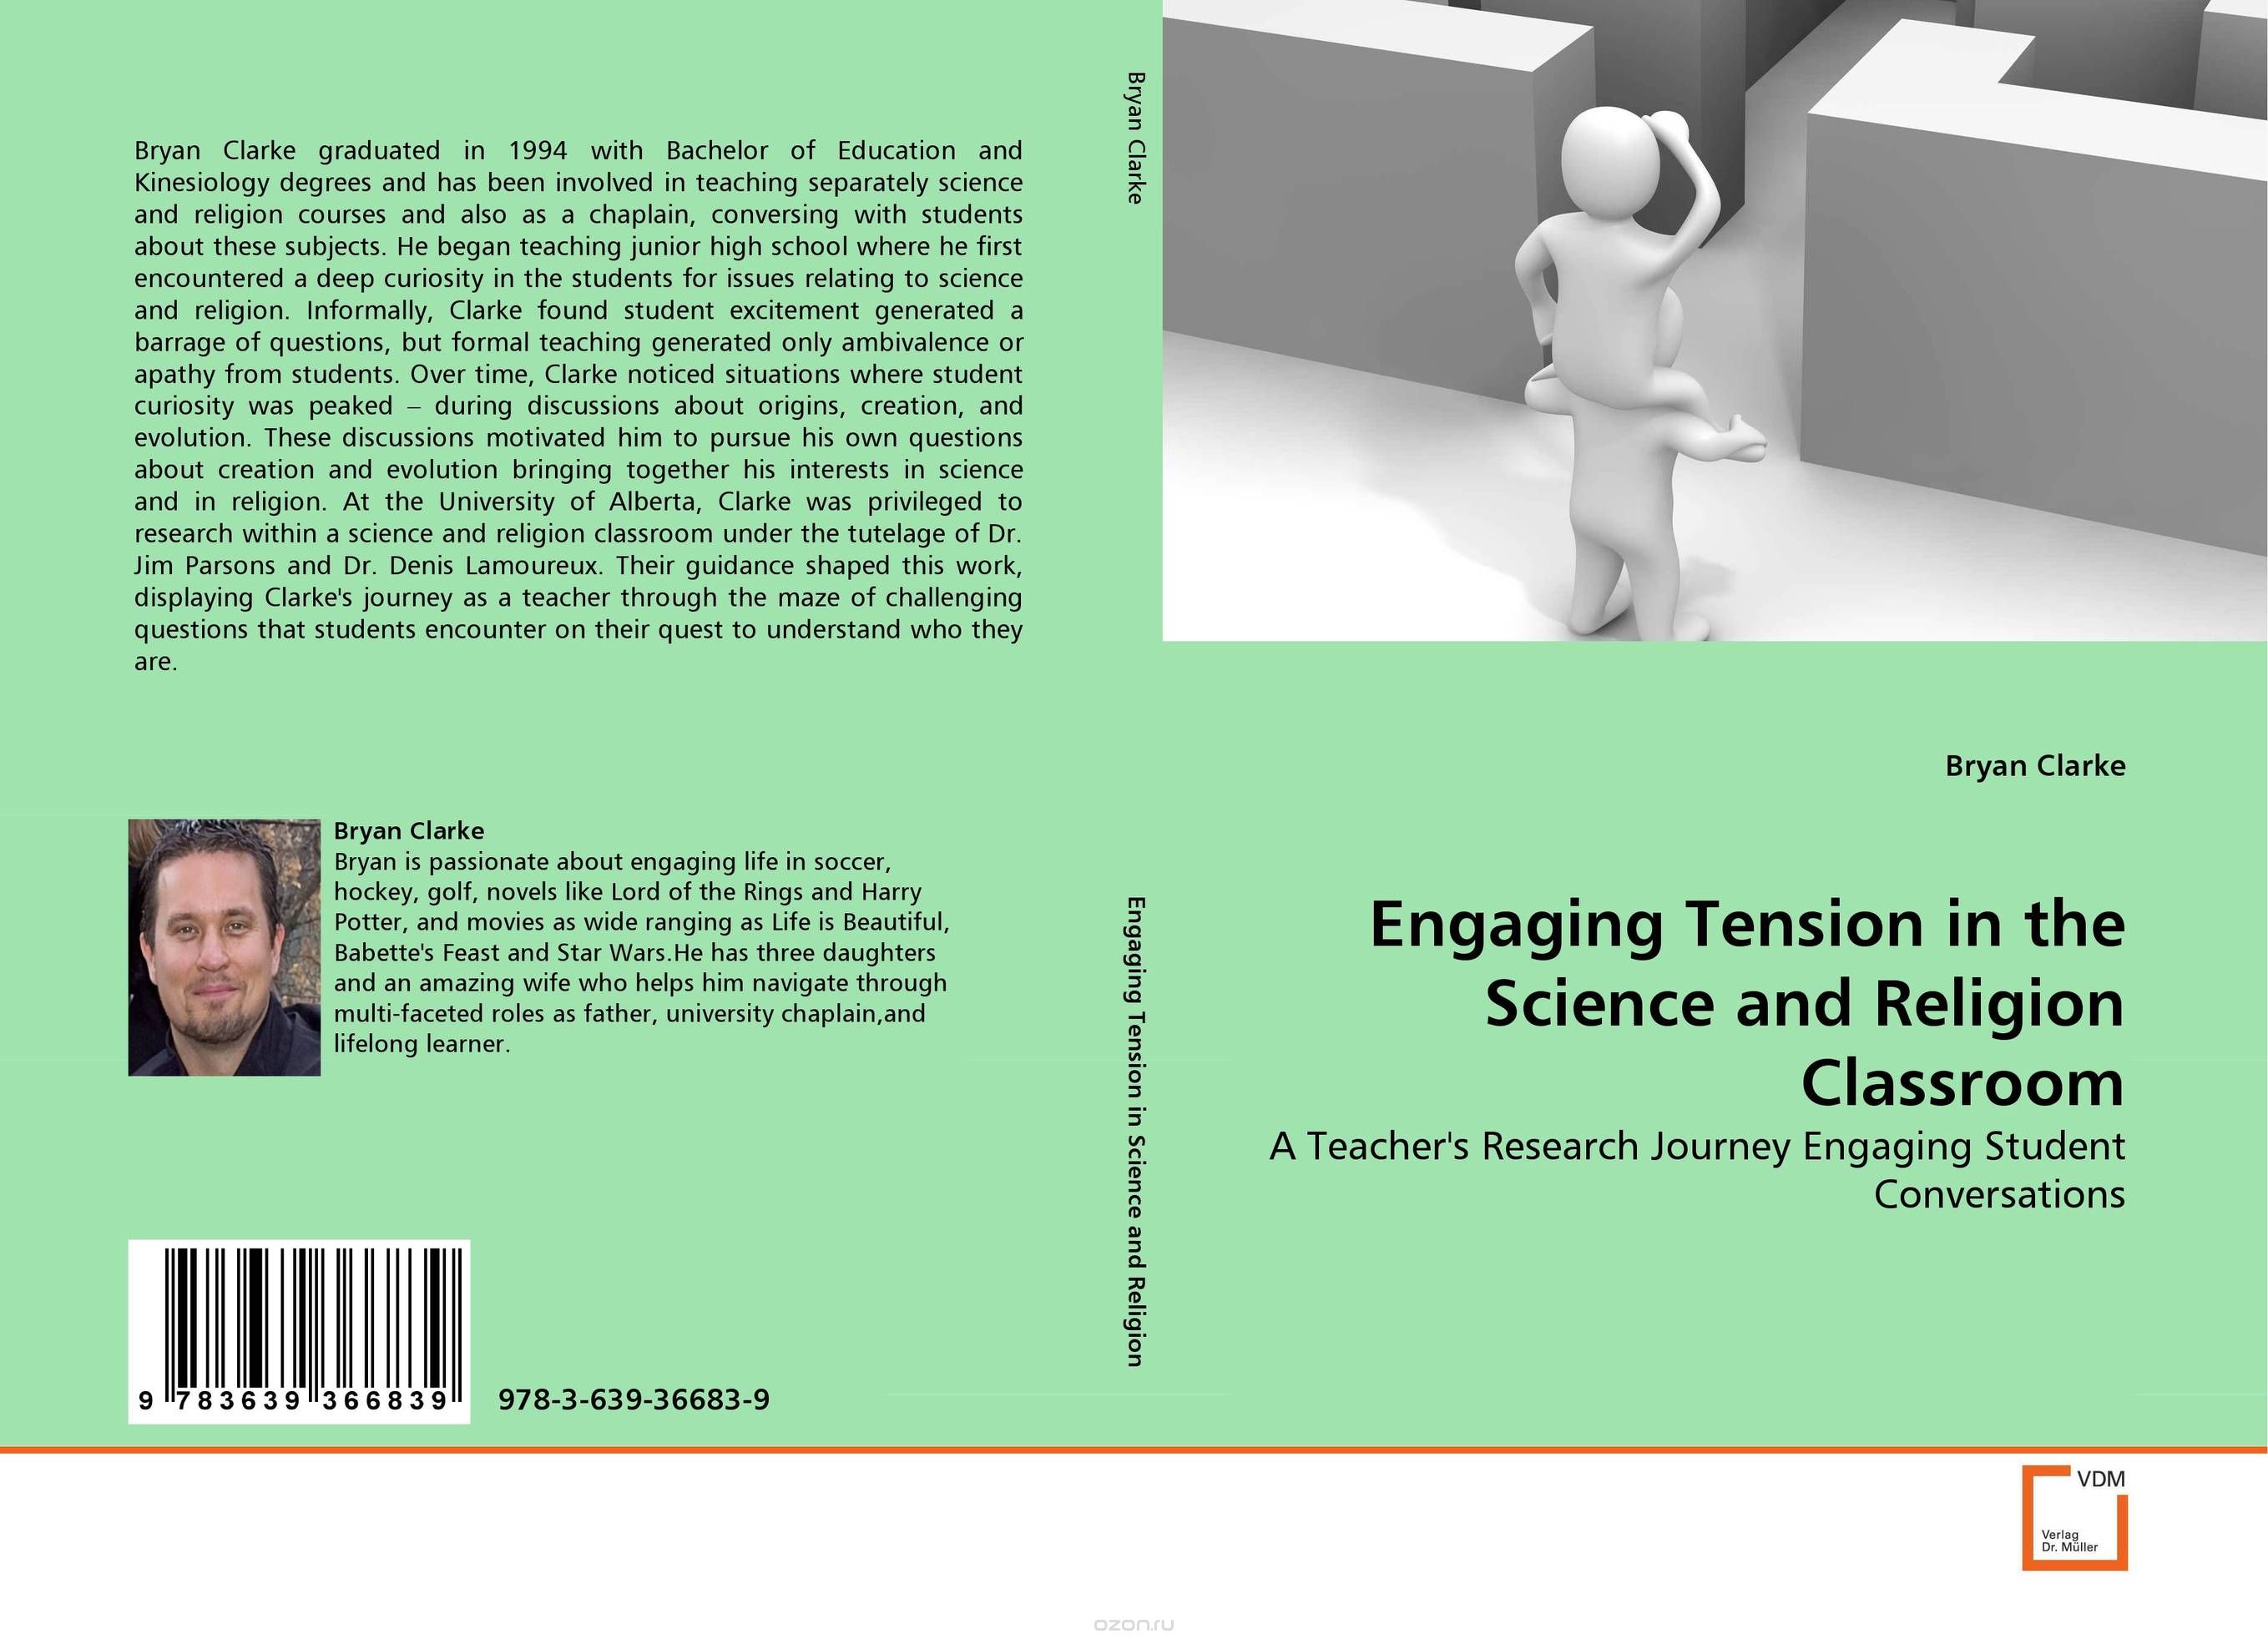 Скачать книгу "Engaging Tension in the Science and Religion Classroom"